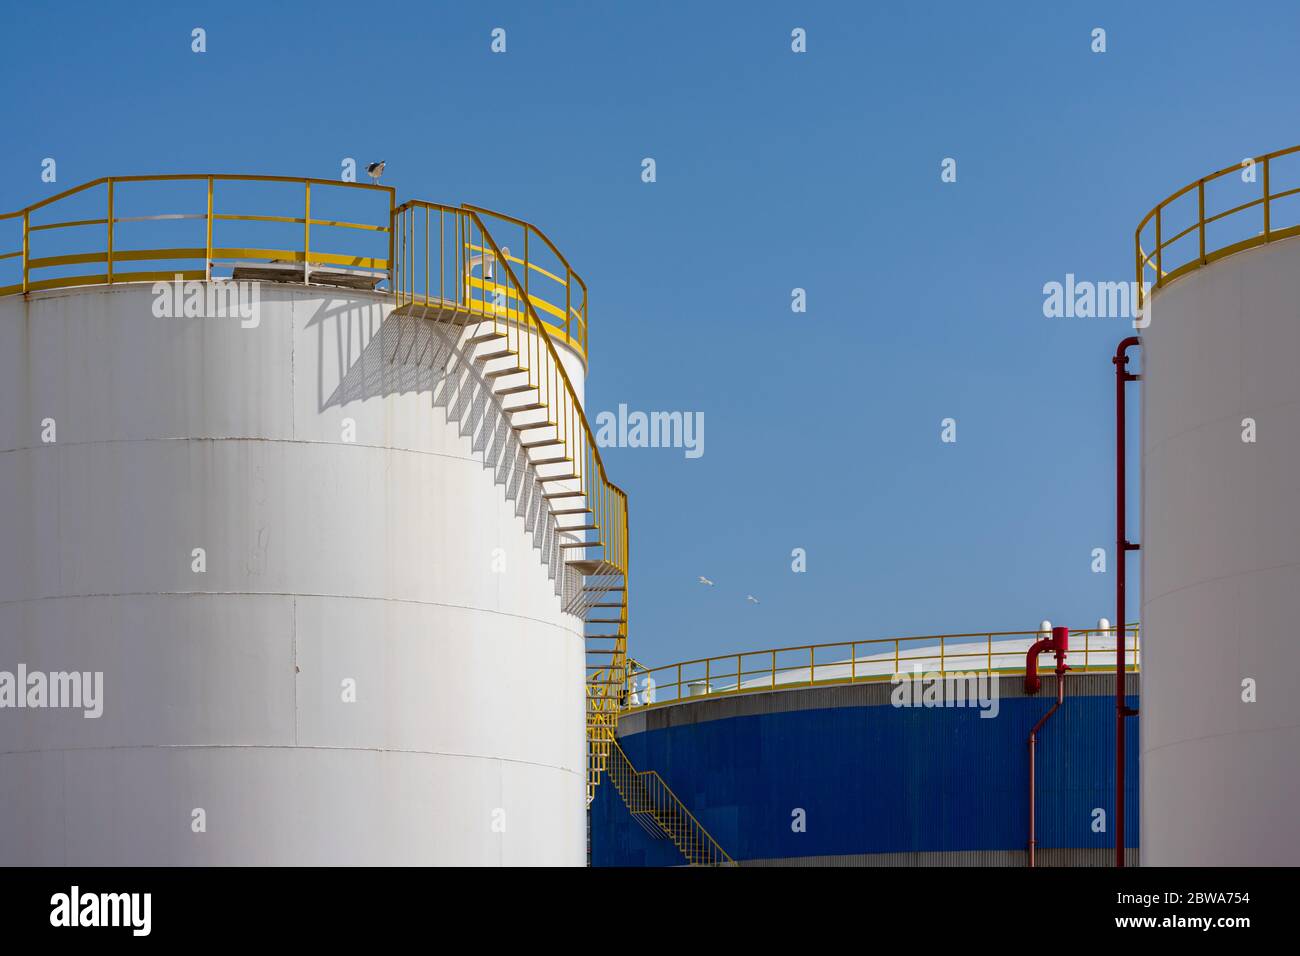 Large tanks for storage and distribution of automotive, aviation and marine fuels. Stock Photo